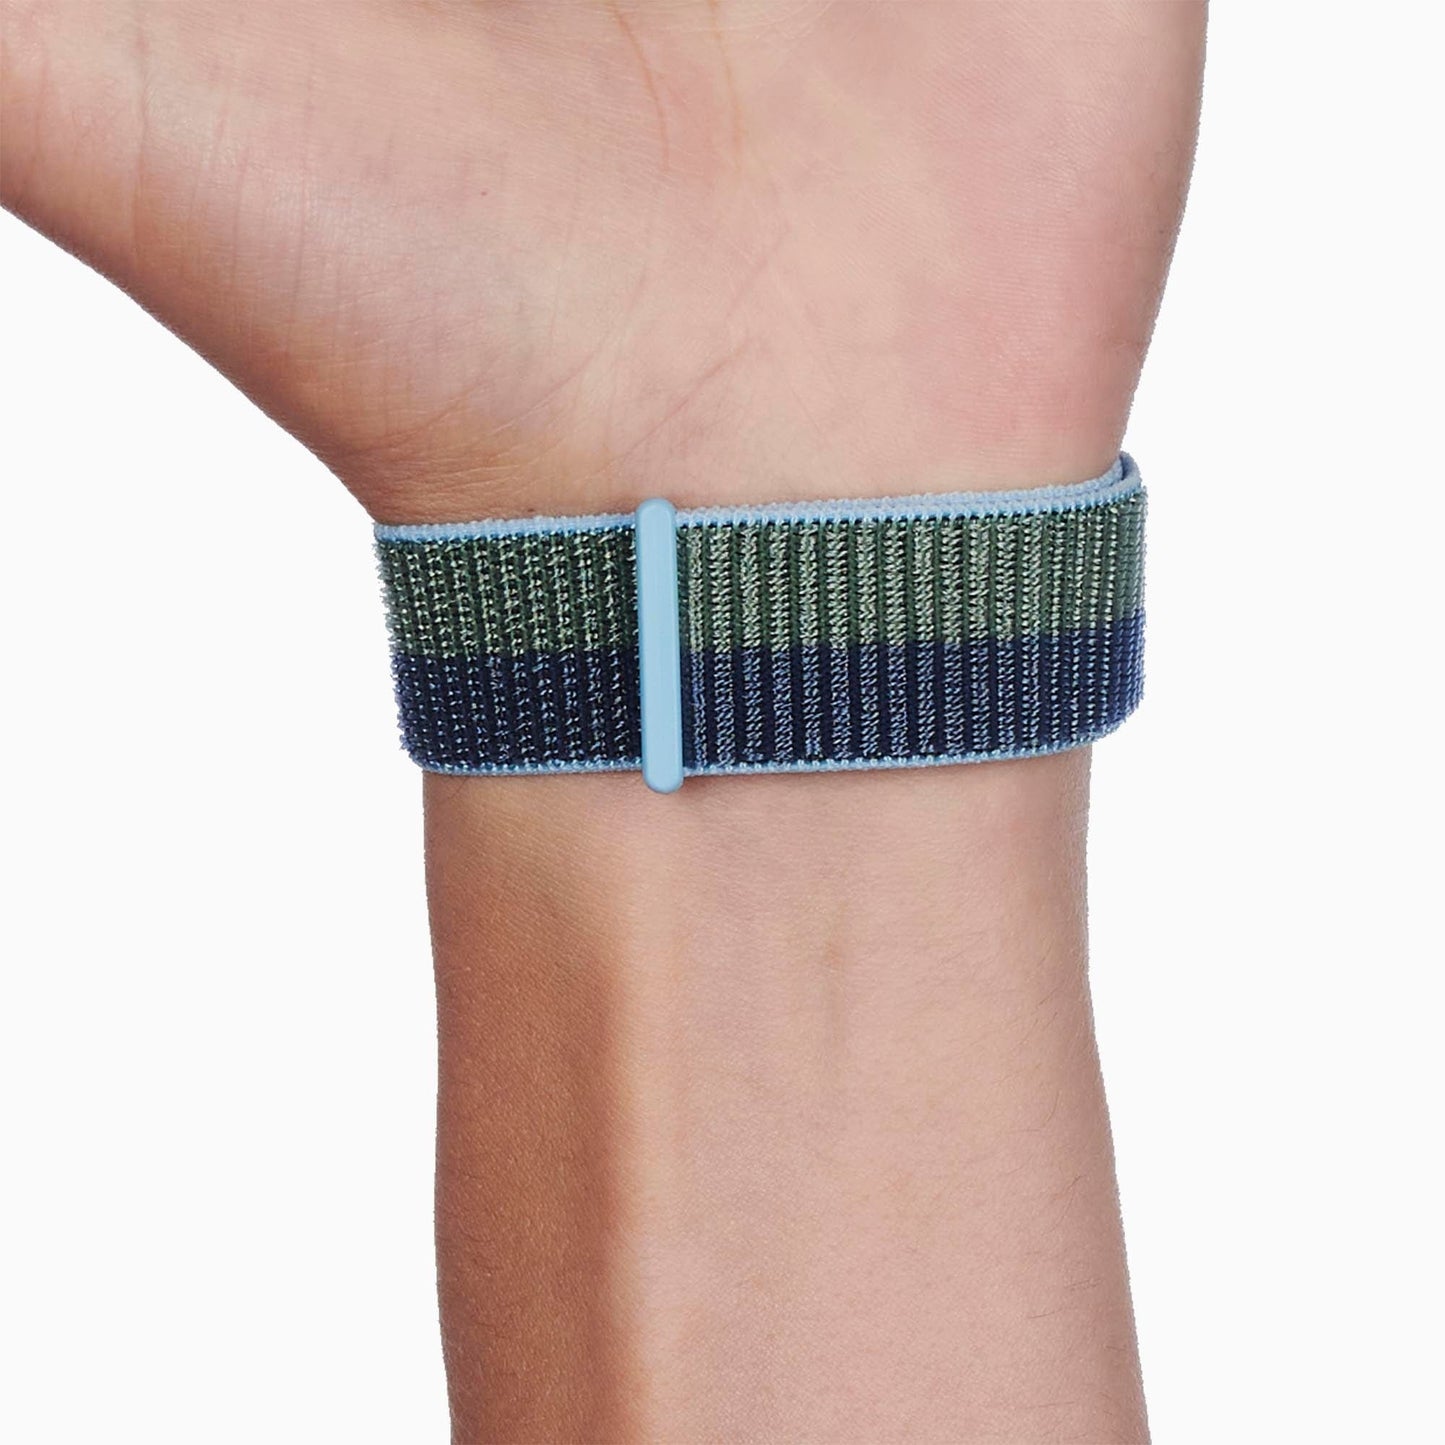 Abyss Blue/Moss Green Sport Loop  for Apple Watch